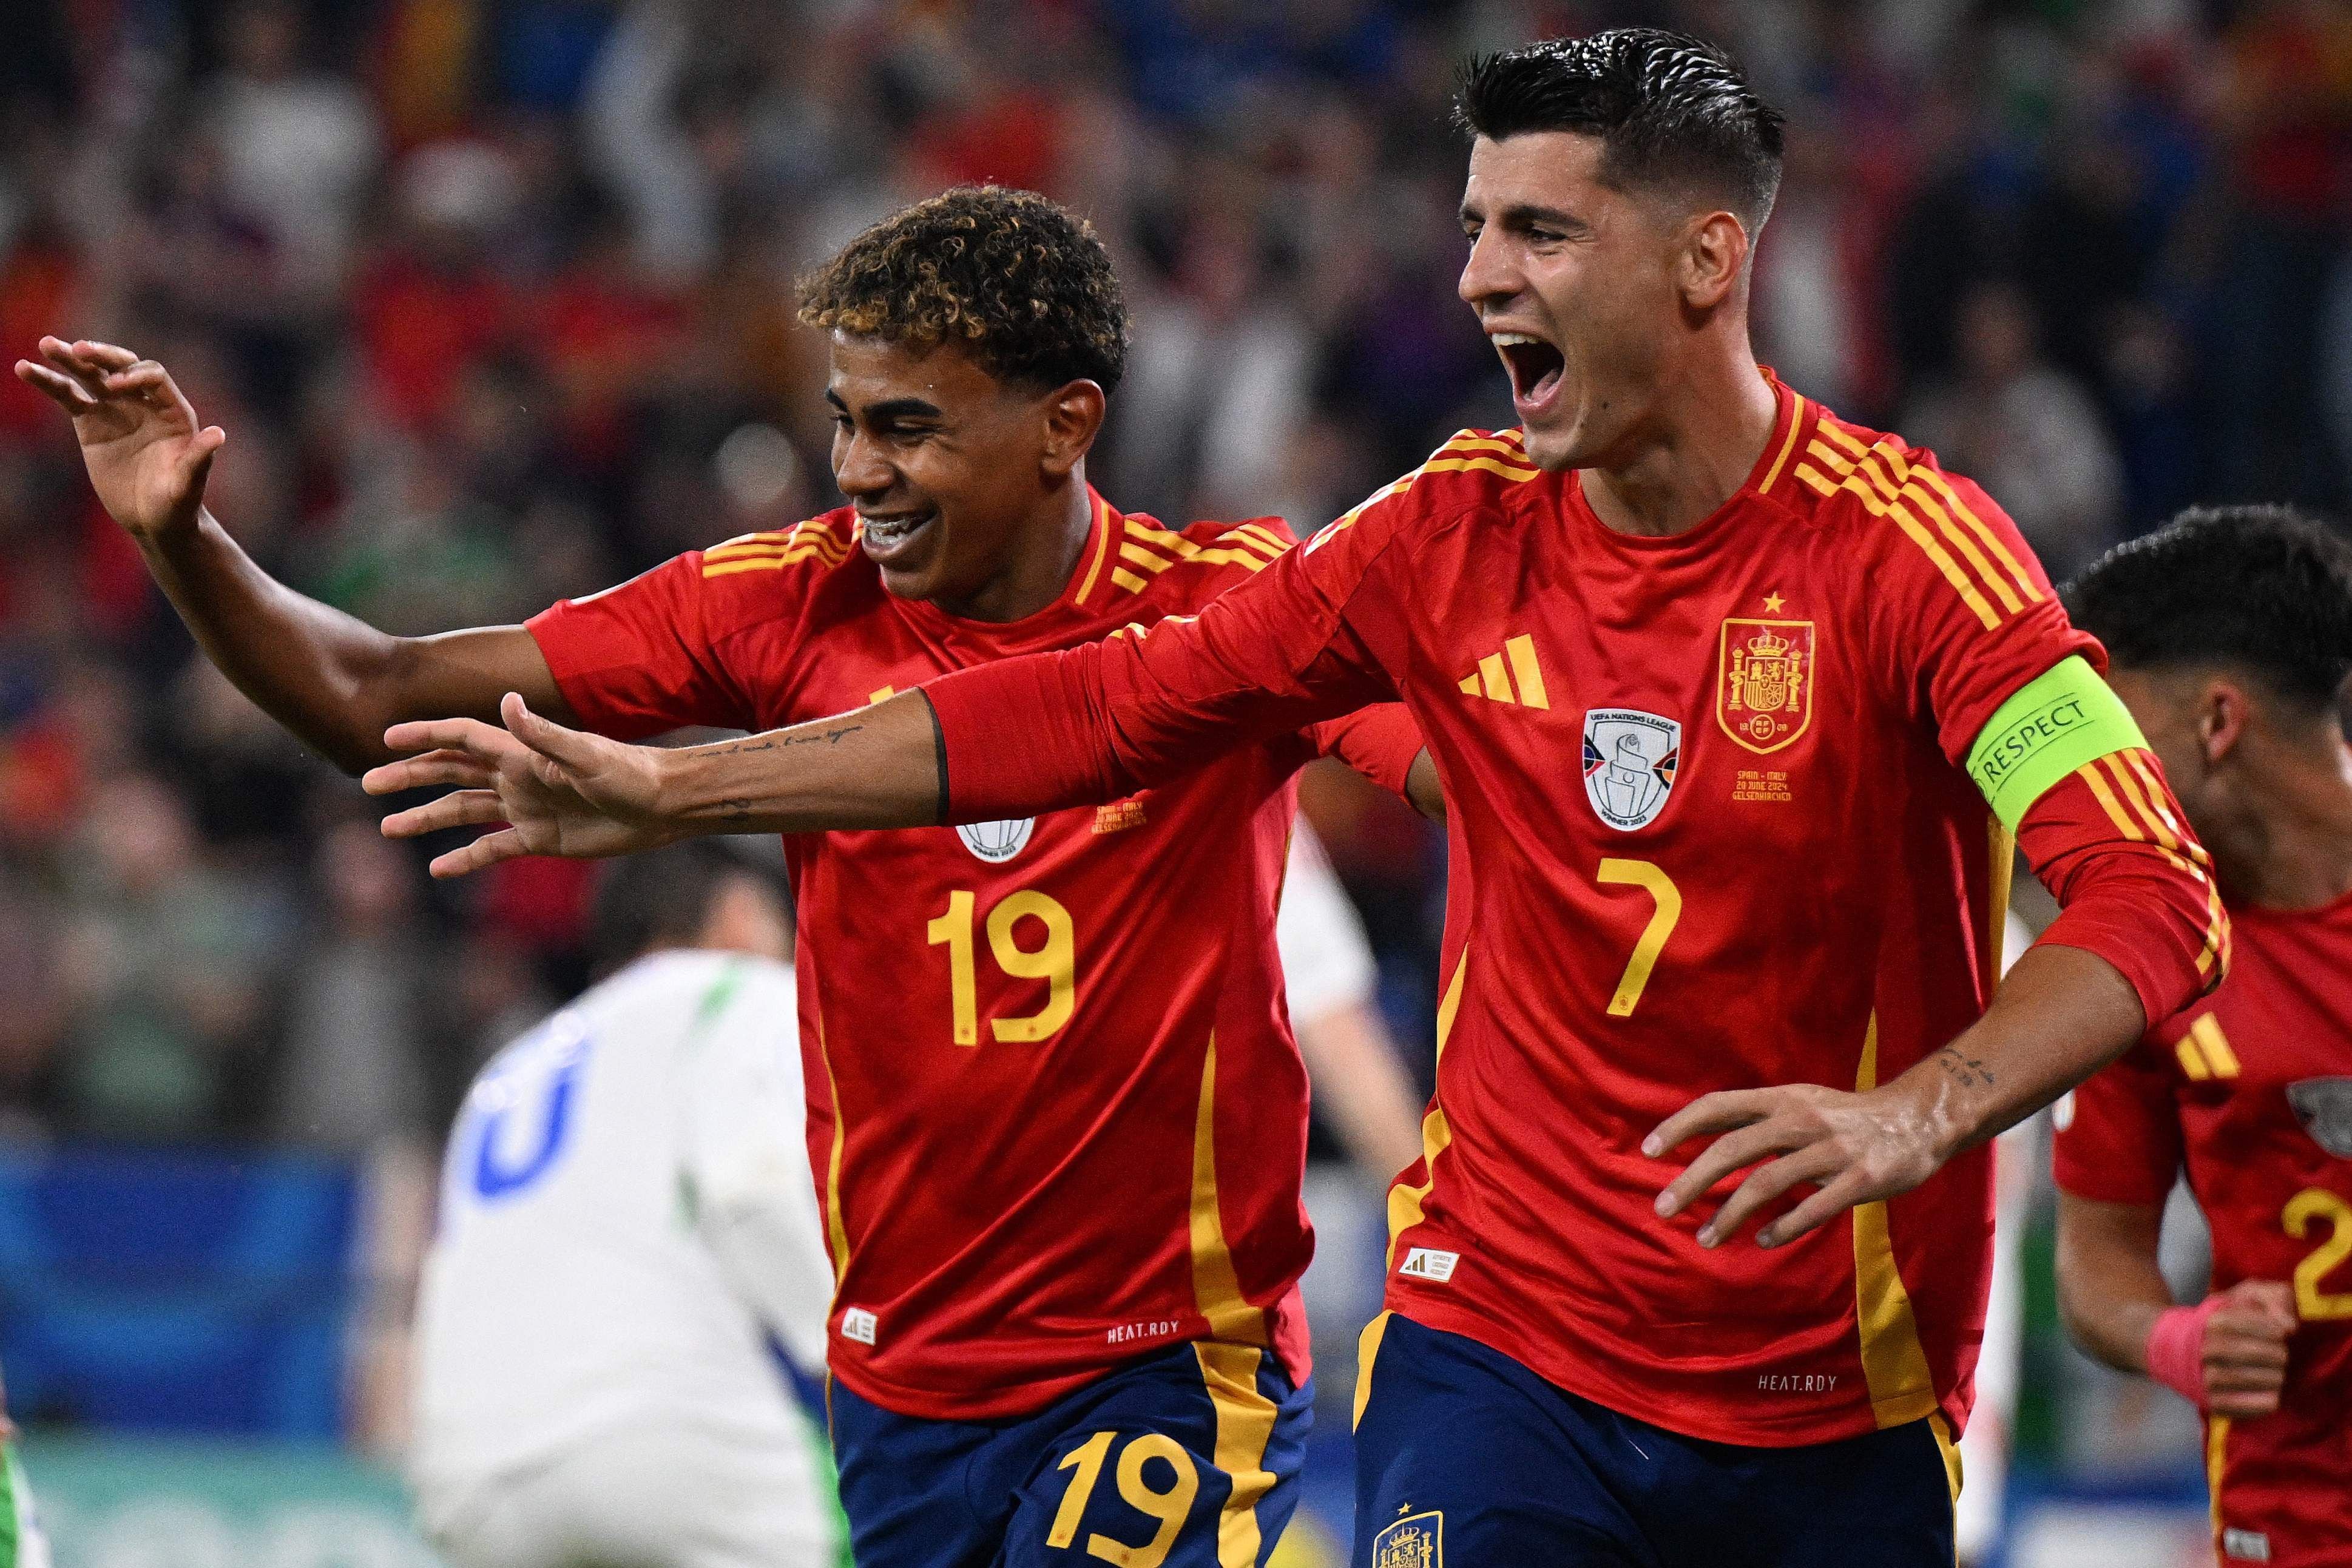 Spain's forward #19 Lamine Yamal (L) and Spain's forward #07 Alvaro Morata (C) celebrate after Italy's defender #05 Riccardo Calafiori scored an own goal during the UEFA Euro 2024 Group B football match between Spain and Italy at the Arena AufSchalke in Gelsenkirchen on June 20, 2024. (Photo by PATRICIA DE MELO MOREIRA / AFP)